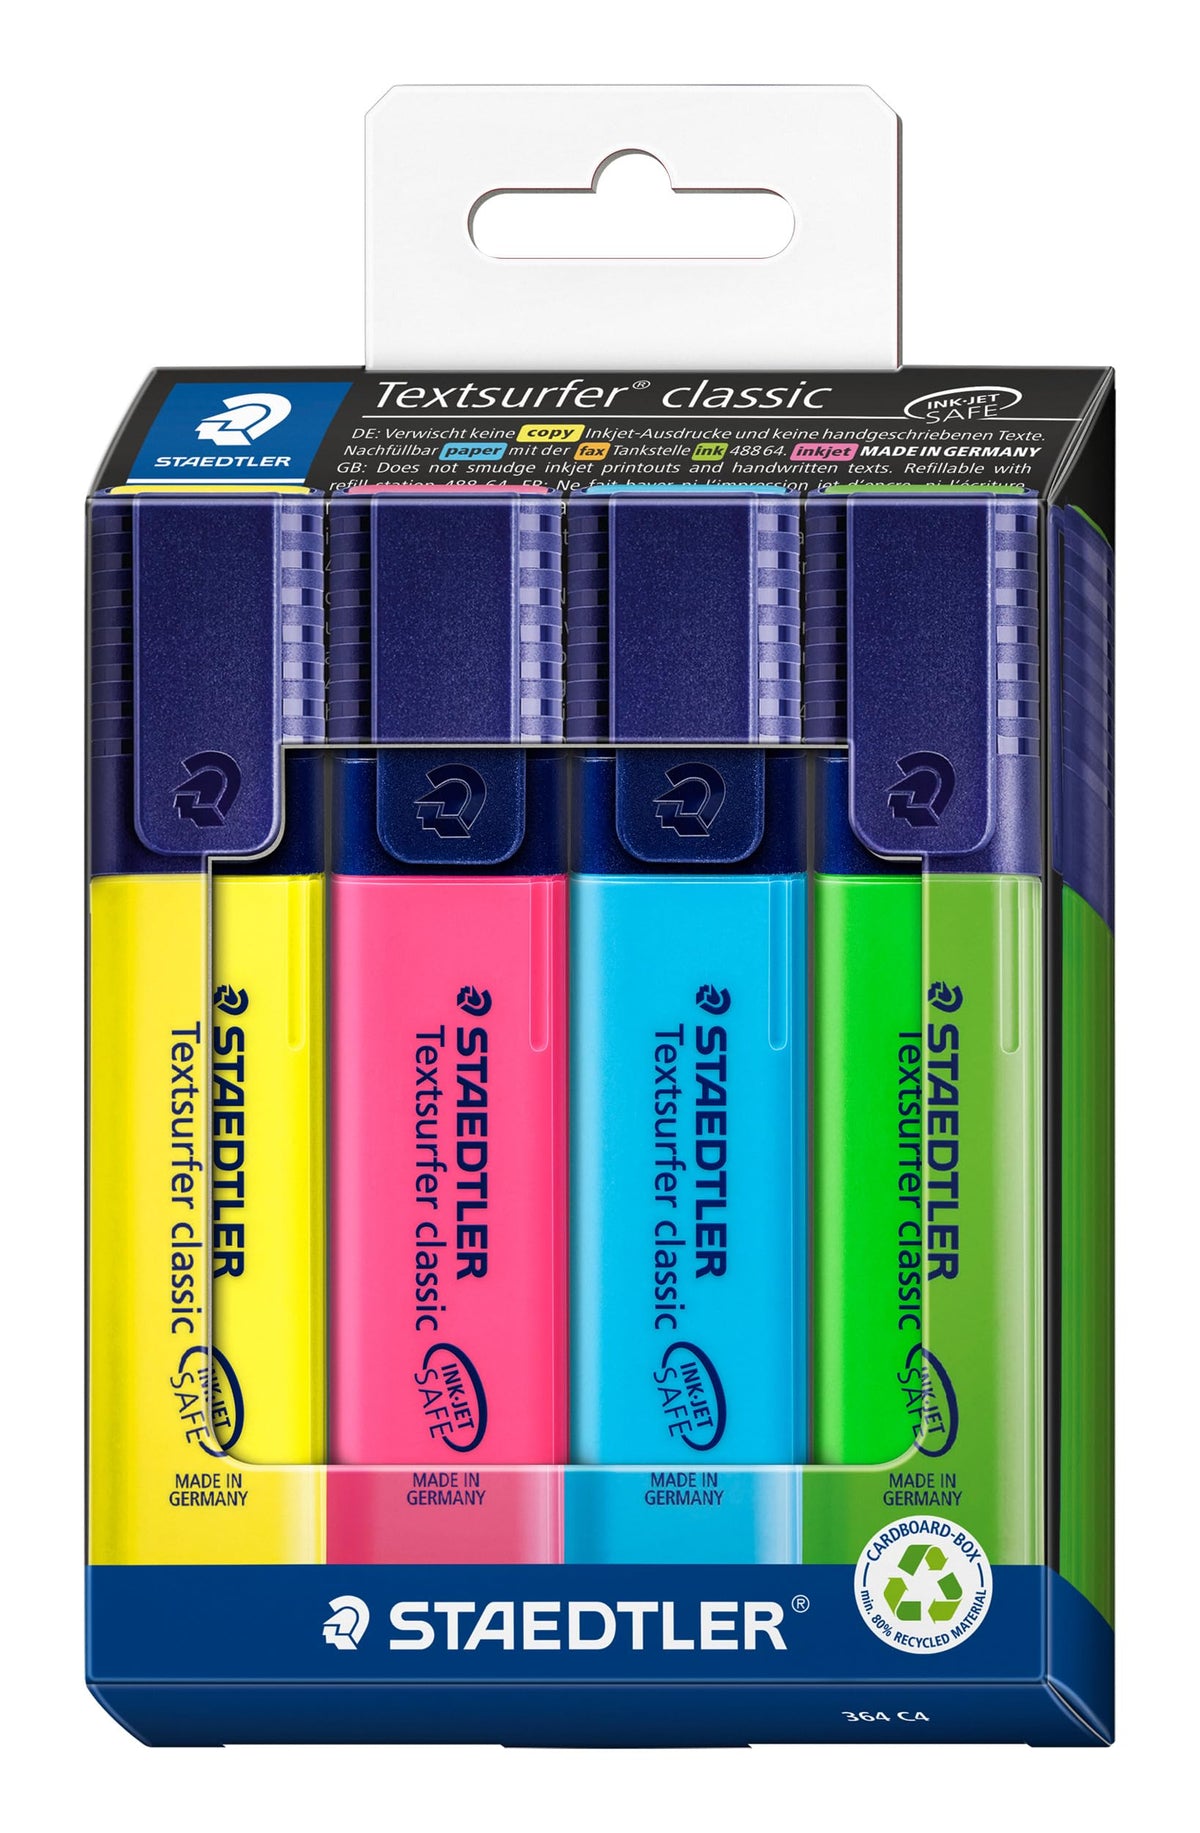 STAEDTLER 364 C4 Textsurfer Classic Highlighter - Assorted Colours (Card Pack of 4)